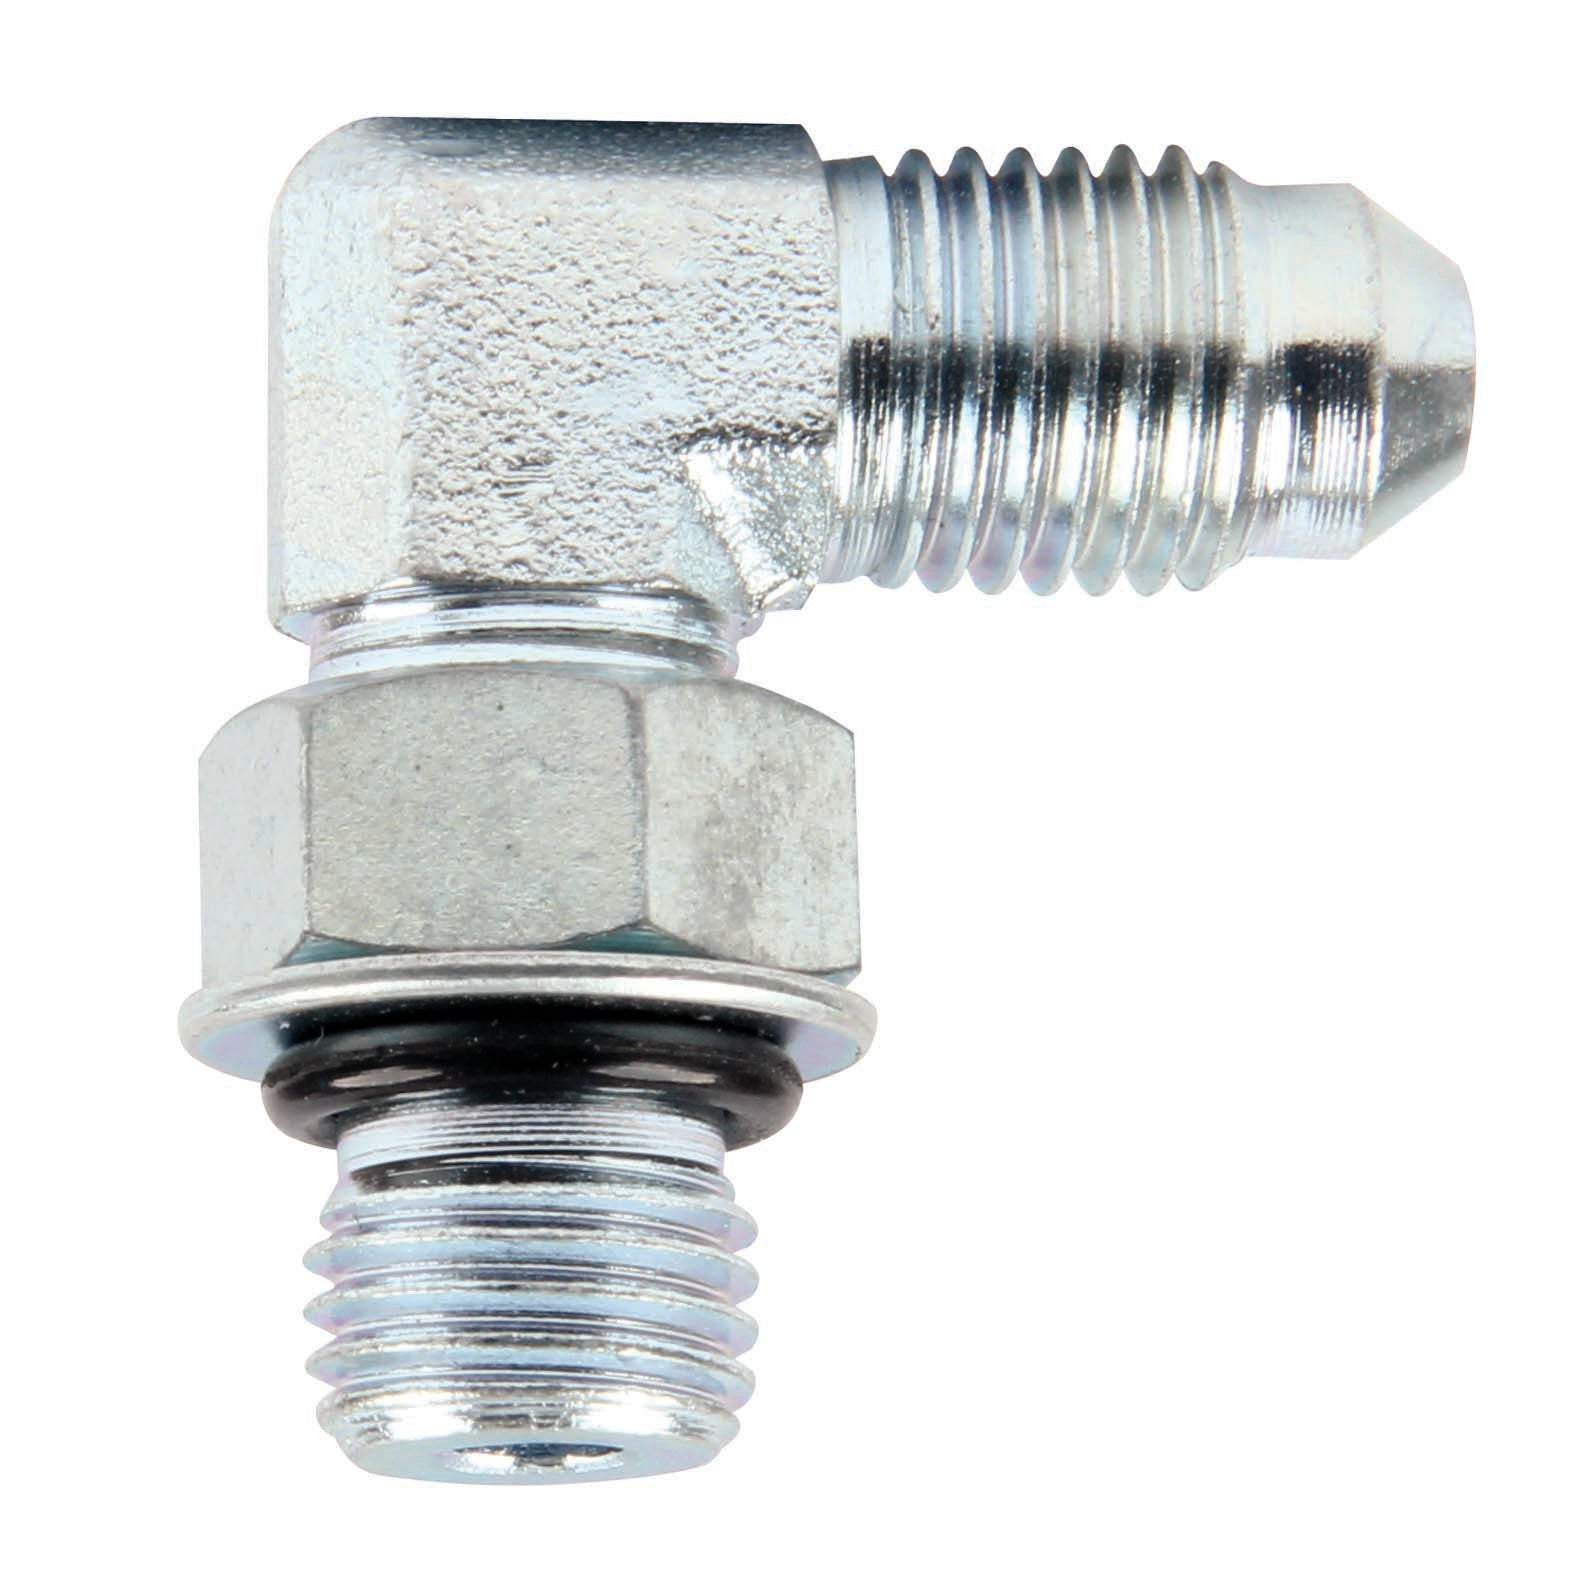 Adapter Fittings -4 to 7/16-20 90 Degree 2pk